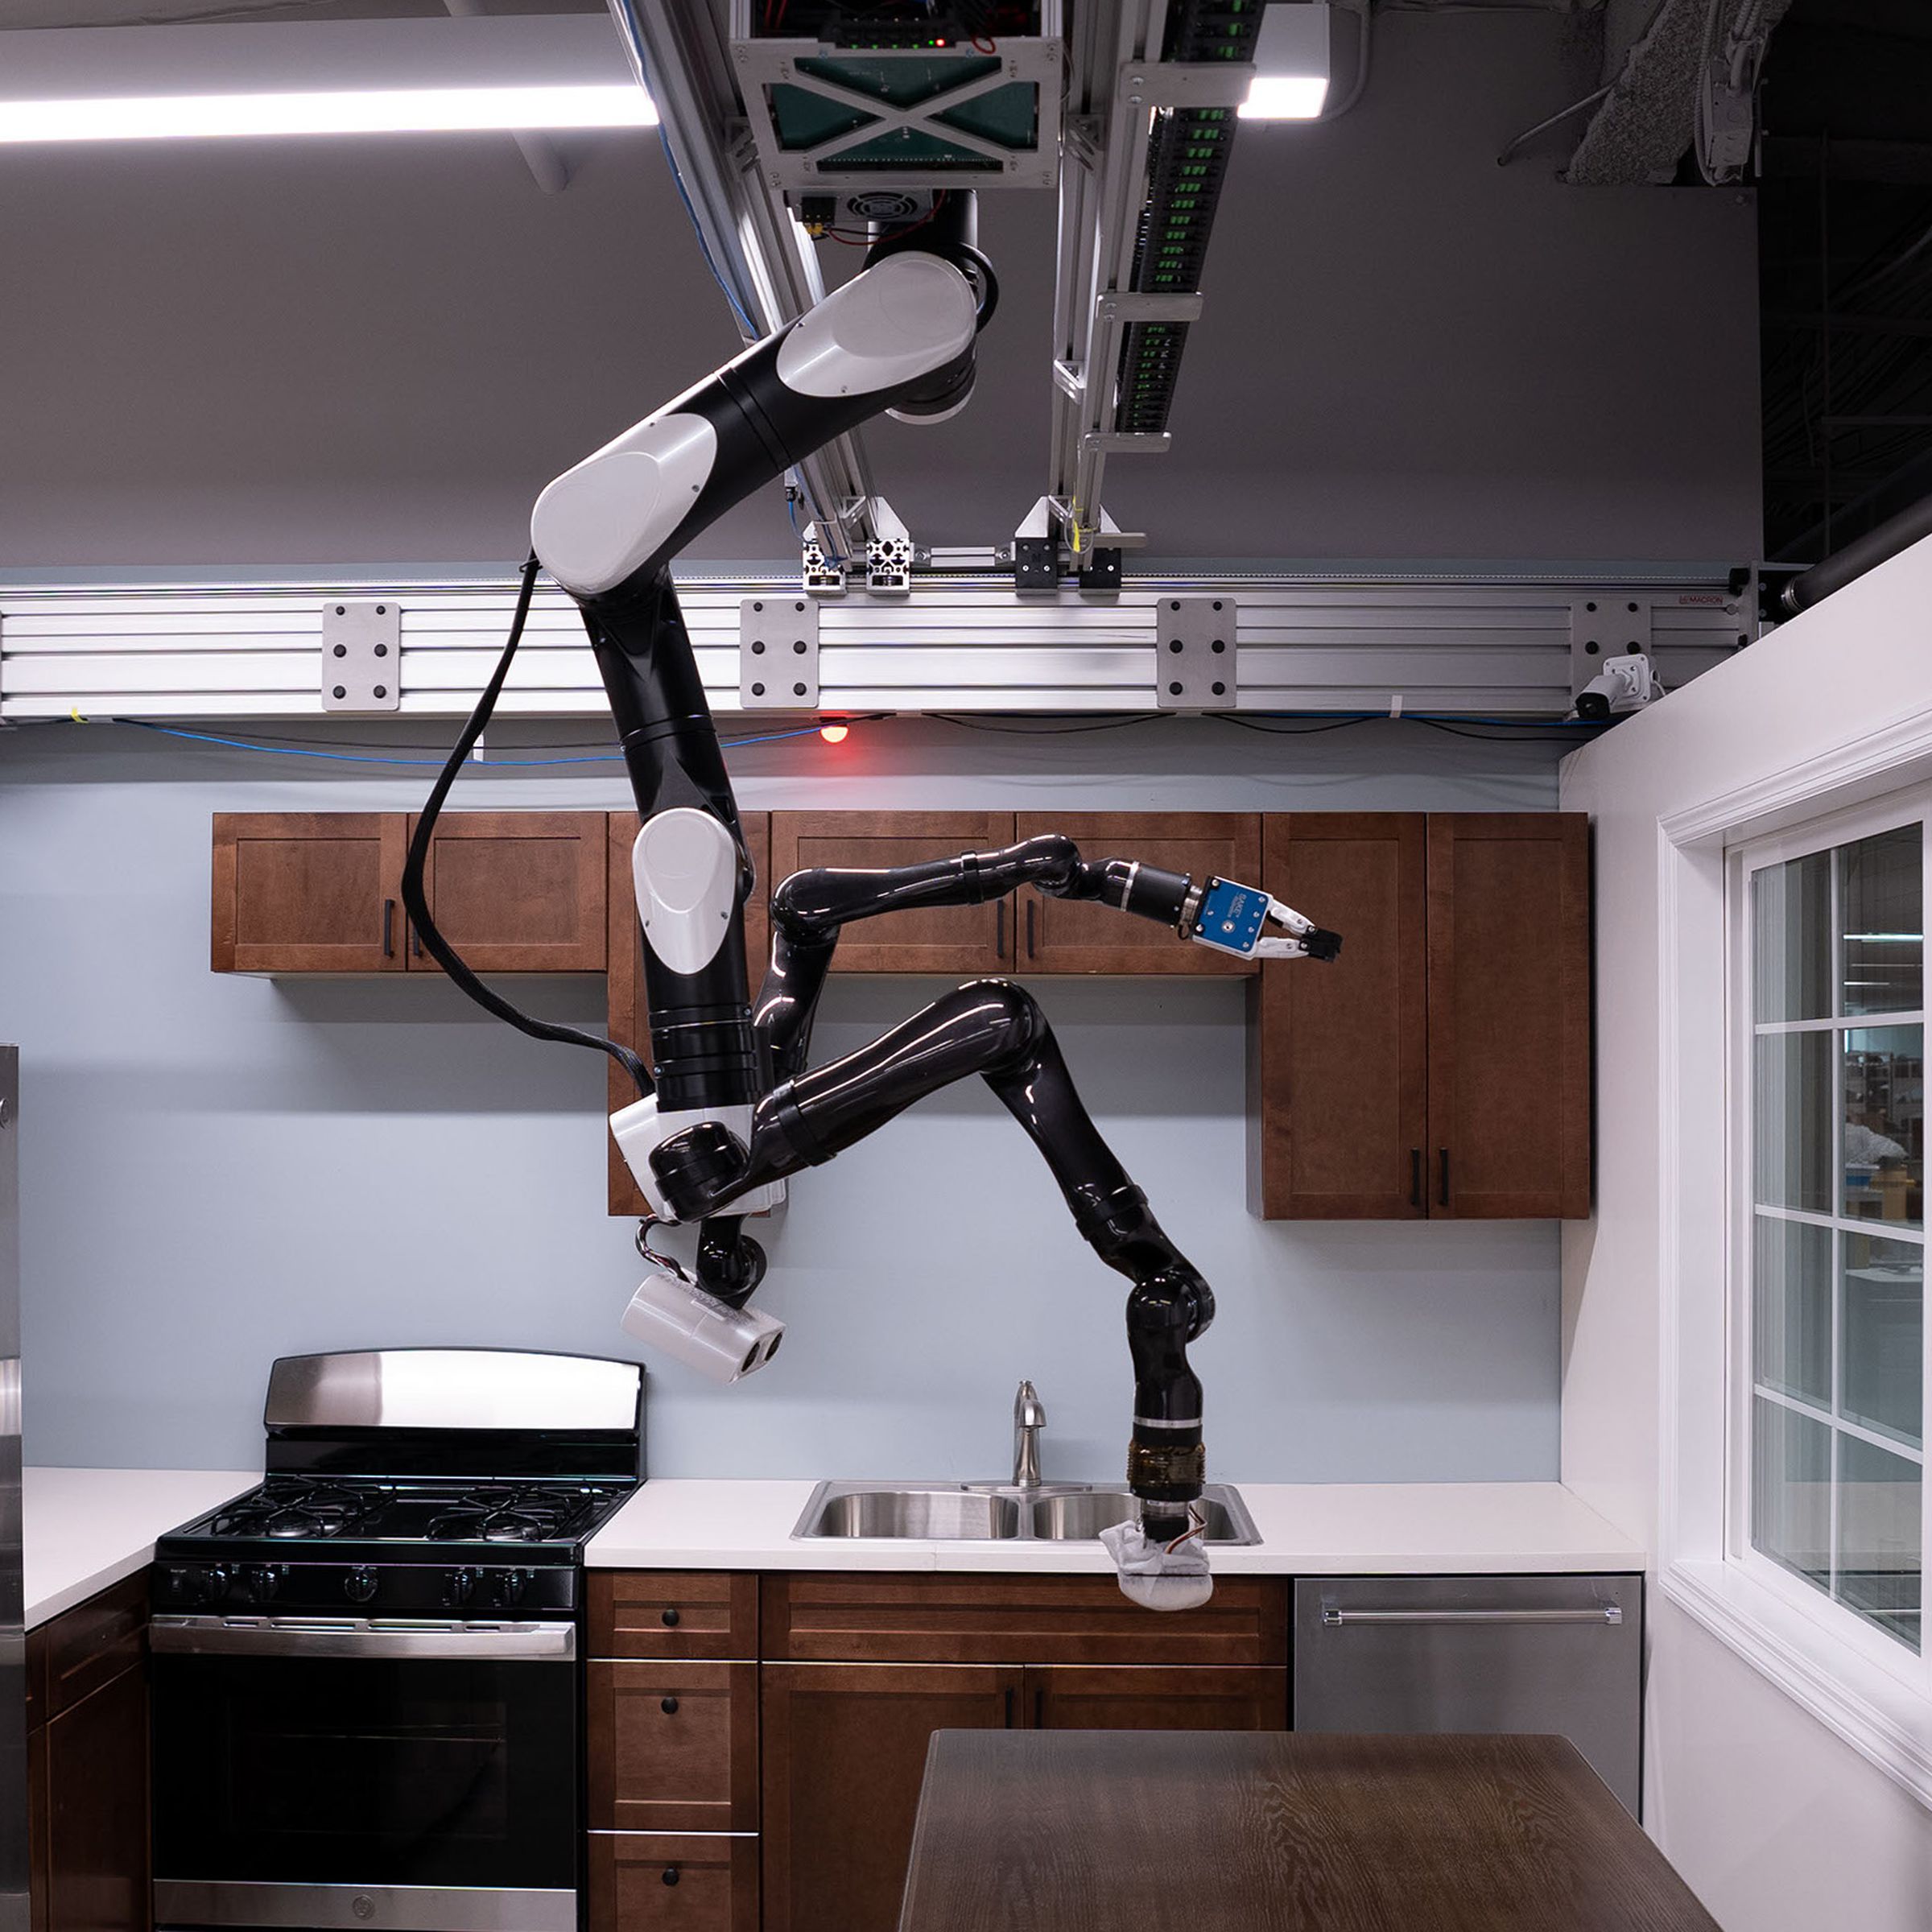 Toyota’s “gantry robot” was designed to save on floor space. 